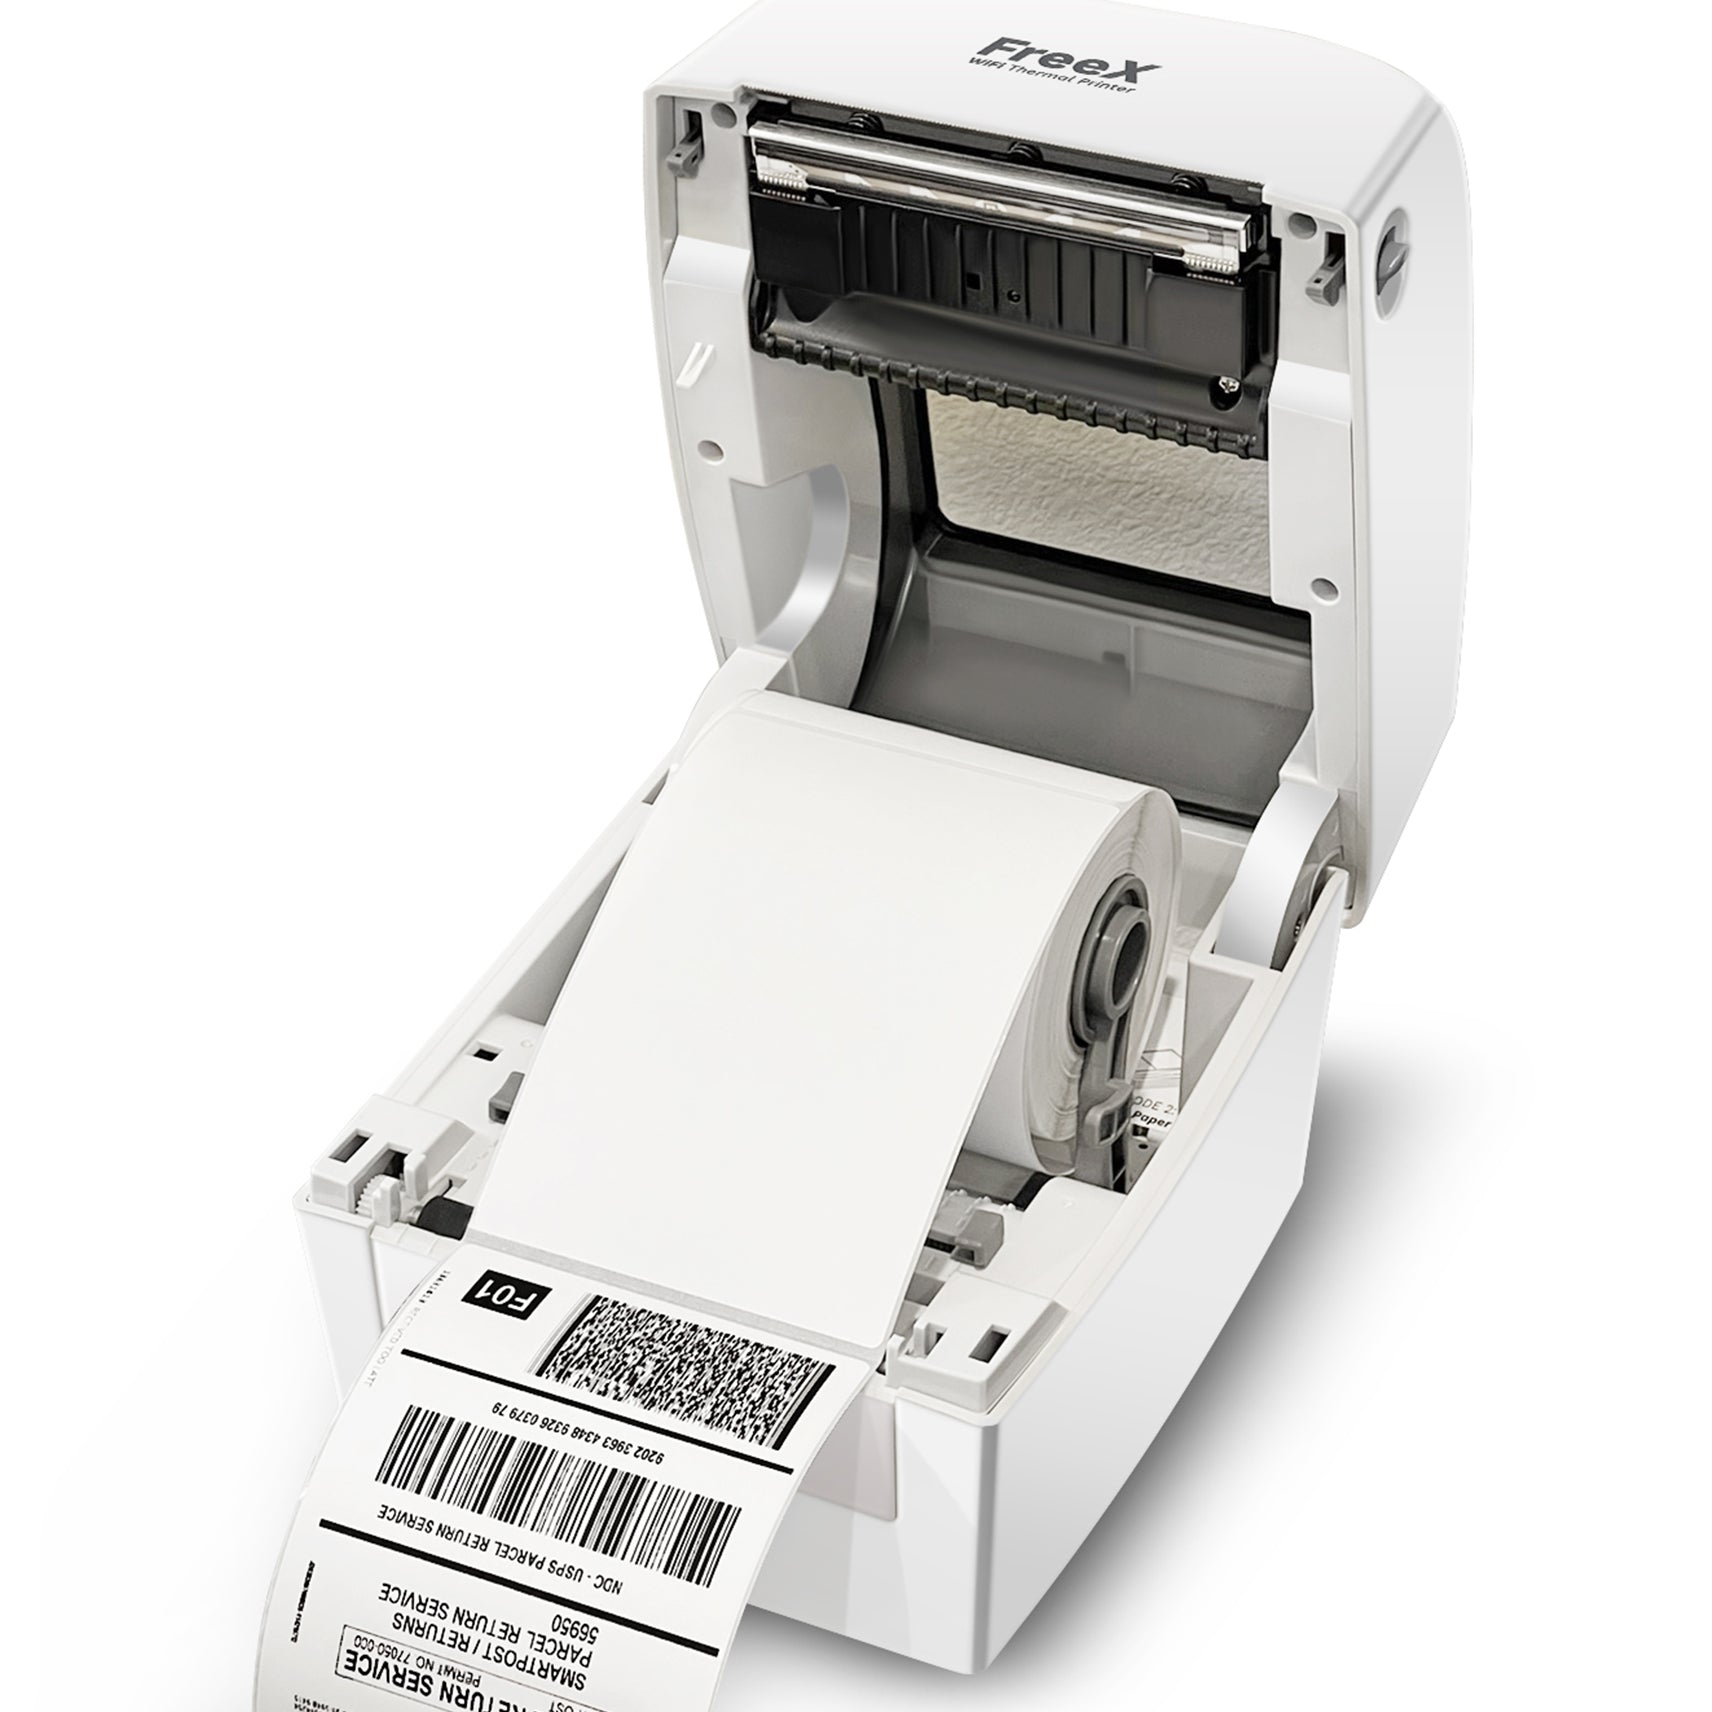 Ass precedent zanger FreeX WiFi SuperRoll Thermal Printer for 4x6 Shipping Label and More